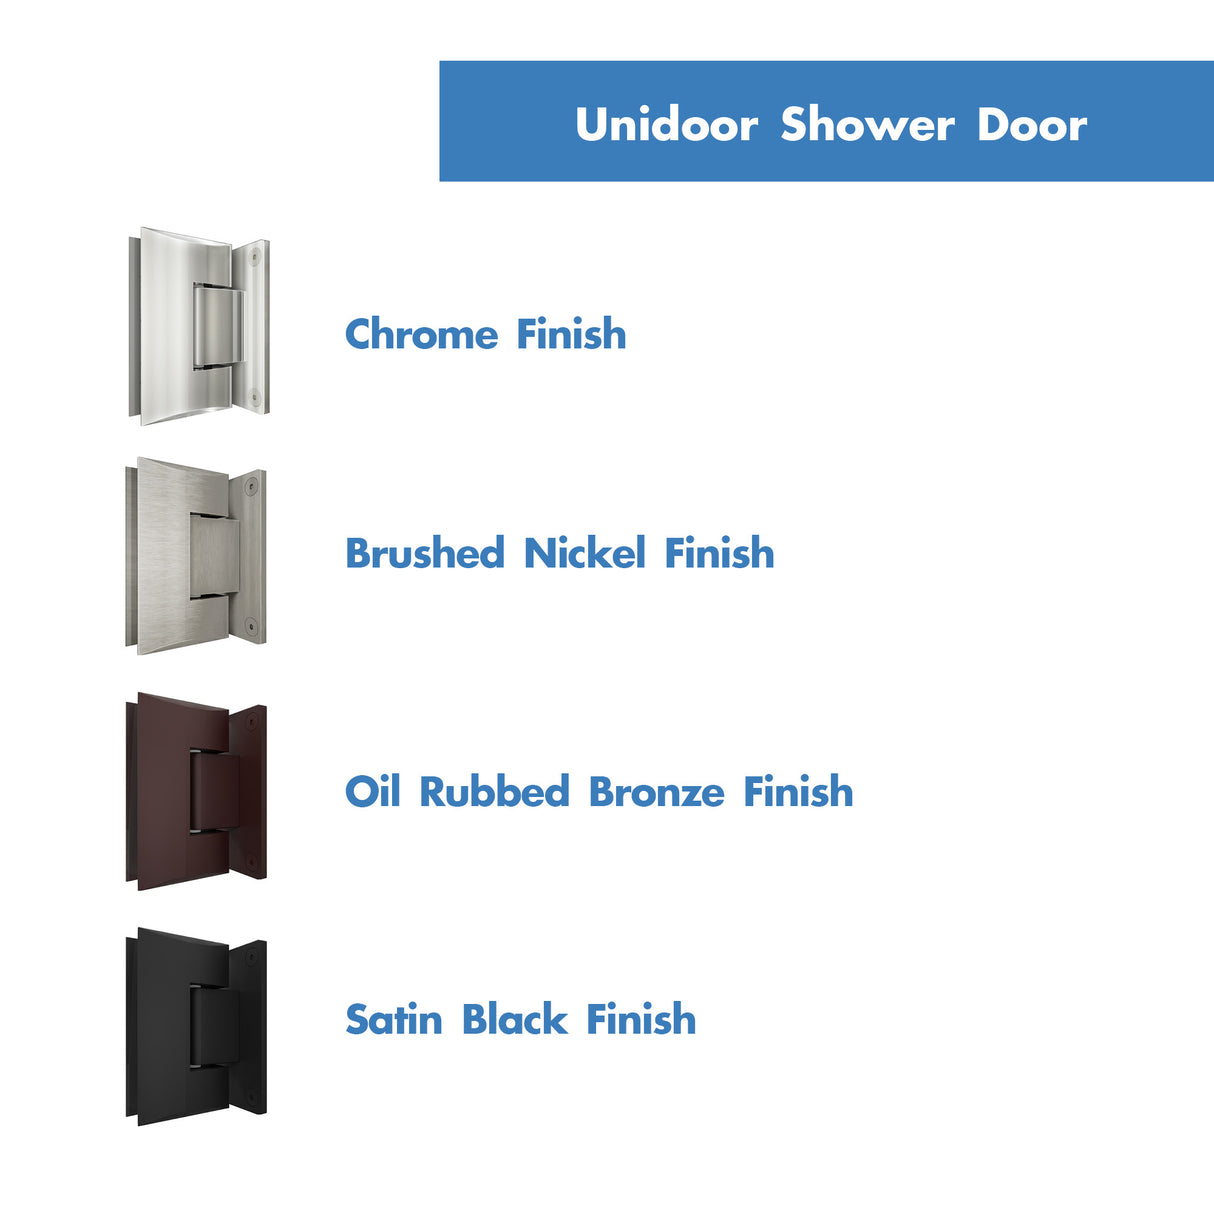 DreamLine Unidoor Plus 37 in. W x 34 3/8 in. D x 72 in. H Frameless Hinged Shower Enclosure in Chrome